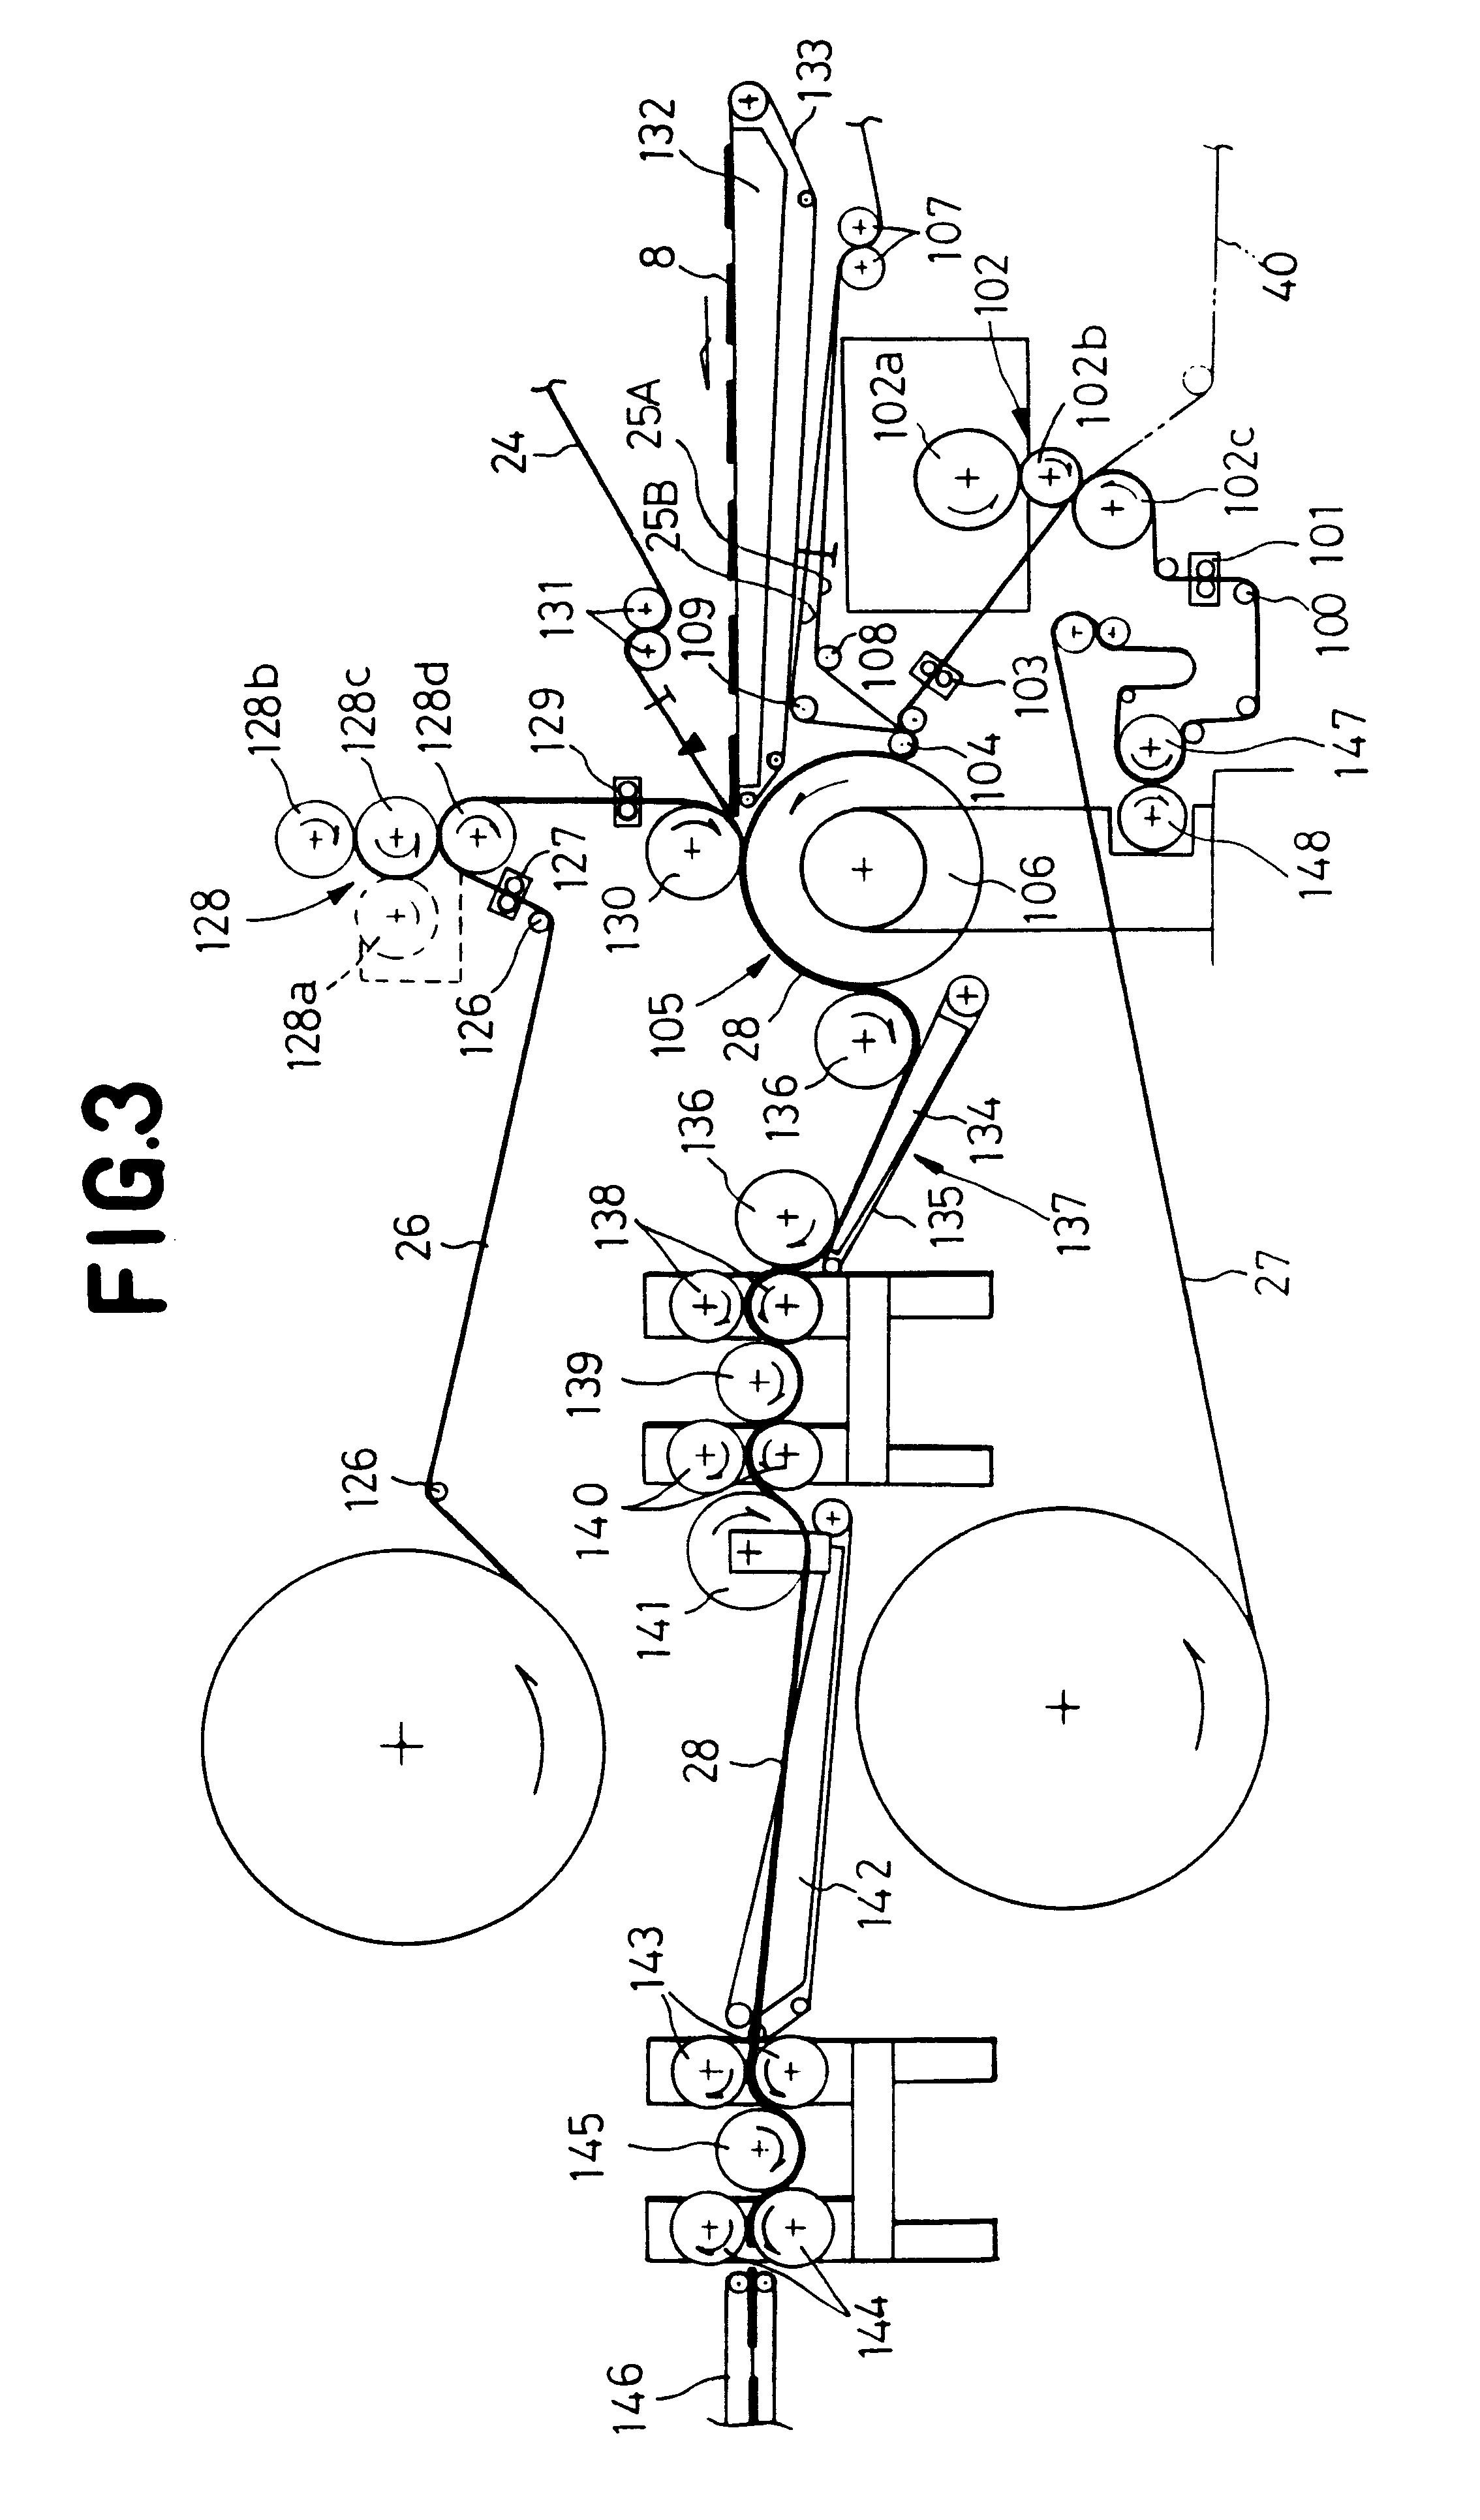 Method of manufacturing disposable underpants by applying annular adhesive zones to the backsheet and top sheet for retaining elastic for leg holes